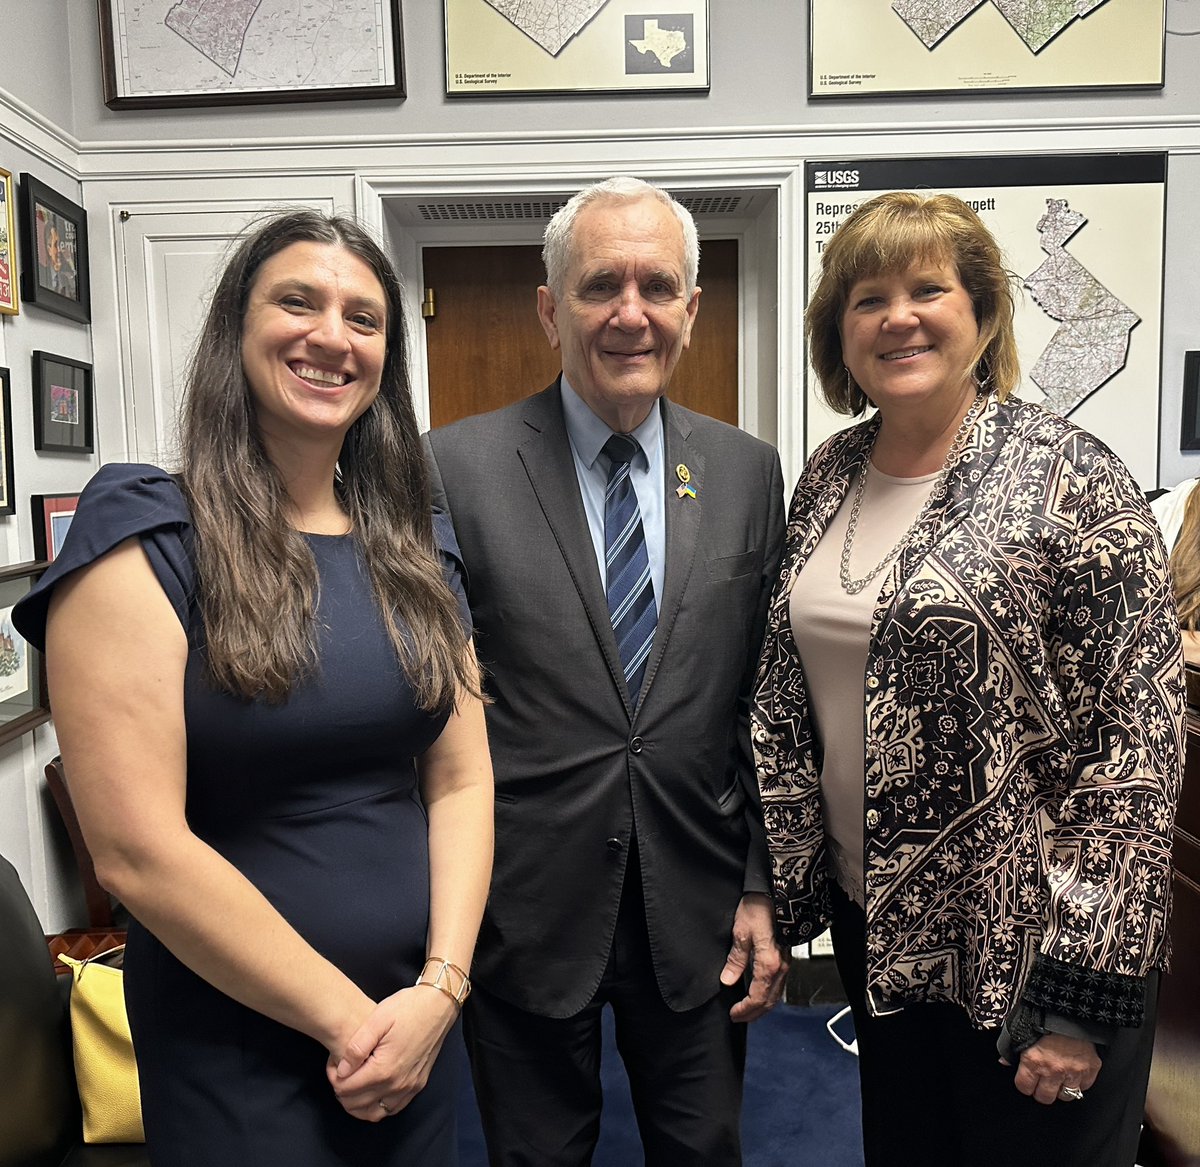 Pleased to meet with Stacy Wilson and Christina Hope from the @ChildHospAssnTX about our work to strengthen Texas' health care system through residency training, expanding postpartum coverage, and ensuring our most vulnerable neighbors have access to a family physician and meds.